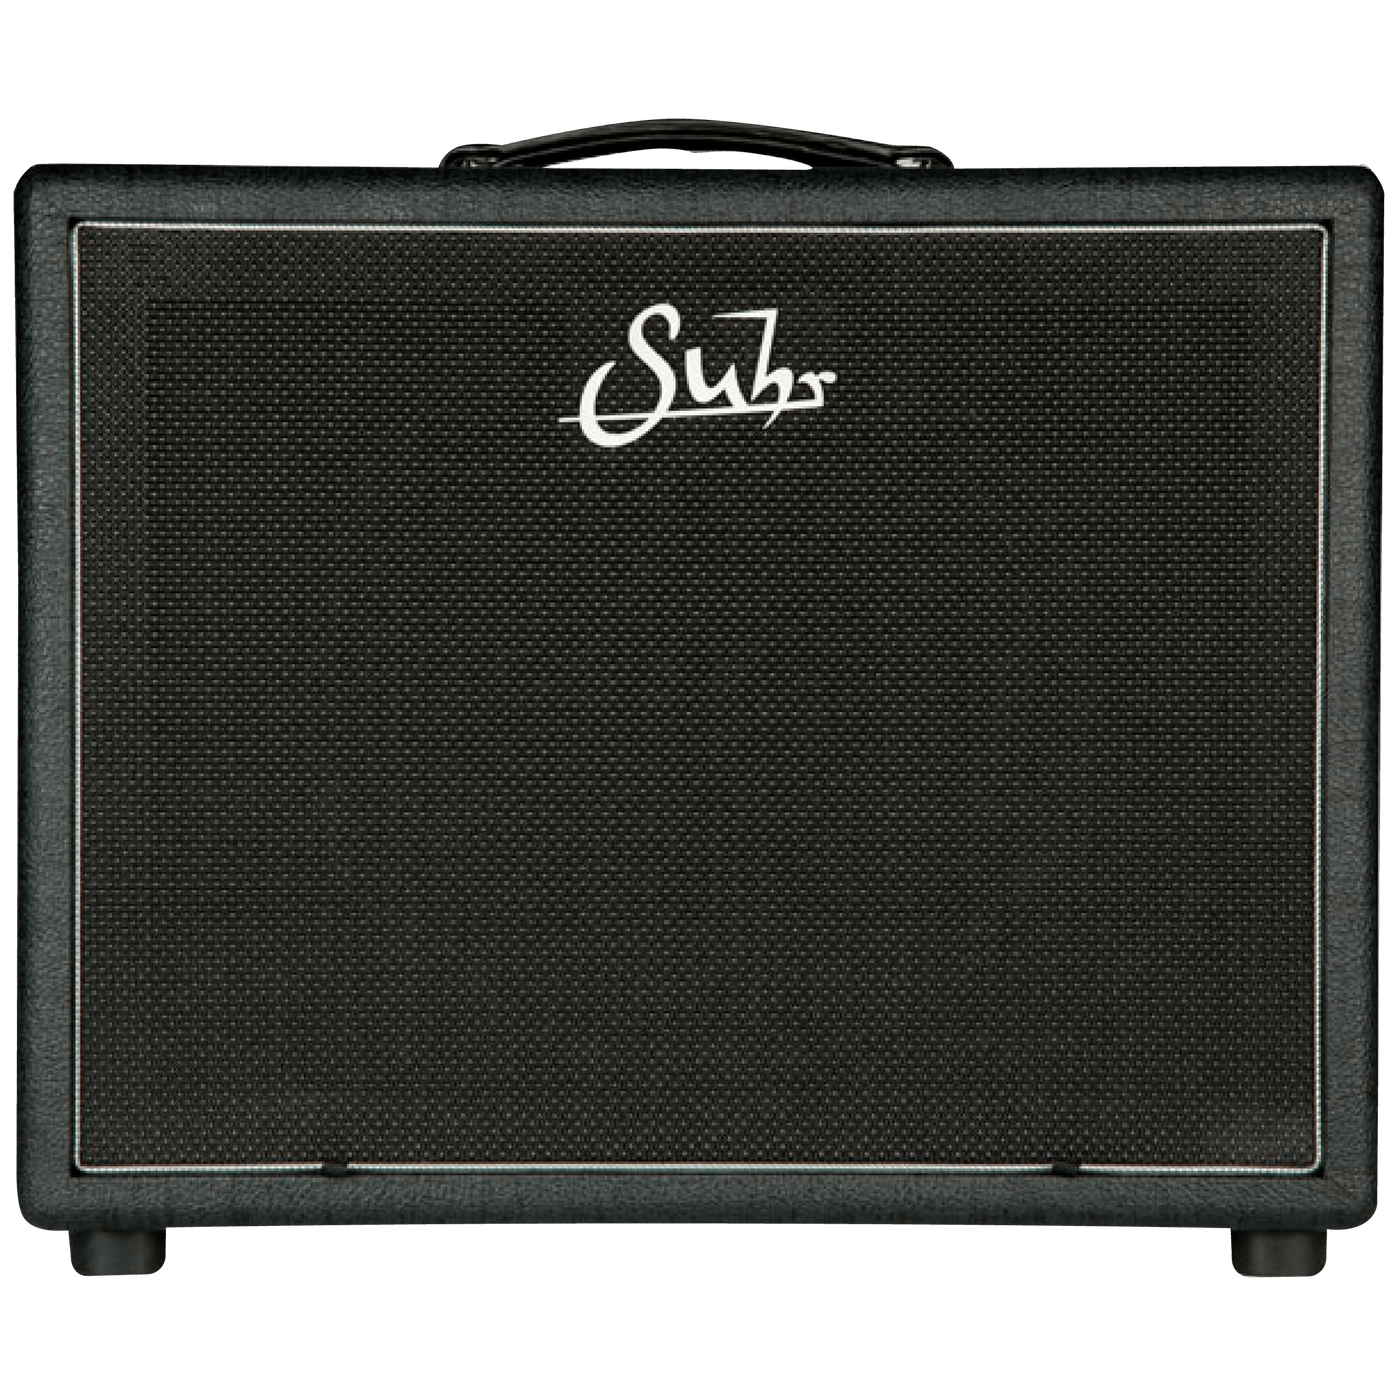 Suhr Badger 1×12 - $999990 - Gearhub - The Suhr Bella 1×12 speaker cabinet comes loaded with a Celestion V-Type speaker, is capable of handling 70 watts, and is the perfect cabinet to match the Suhr Bella amplifier. Potencia • 70 watts Impedancia • 8 Ω Speakers • Celestion V-Type Dimensiones • 452mm x 610 mm x 254 mm Peso • 12.6 kg